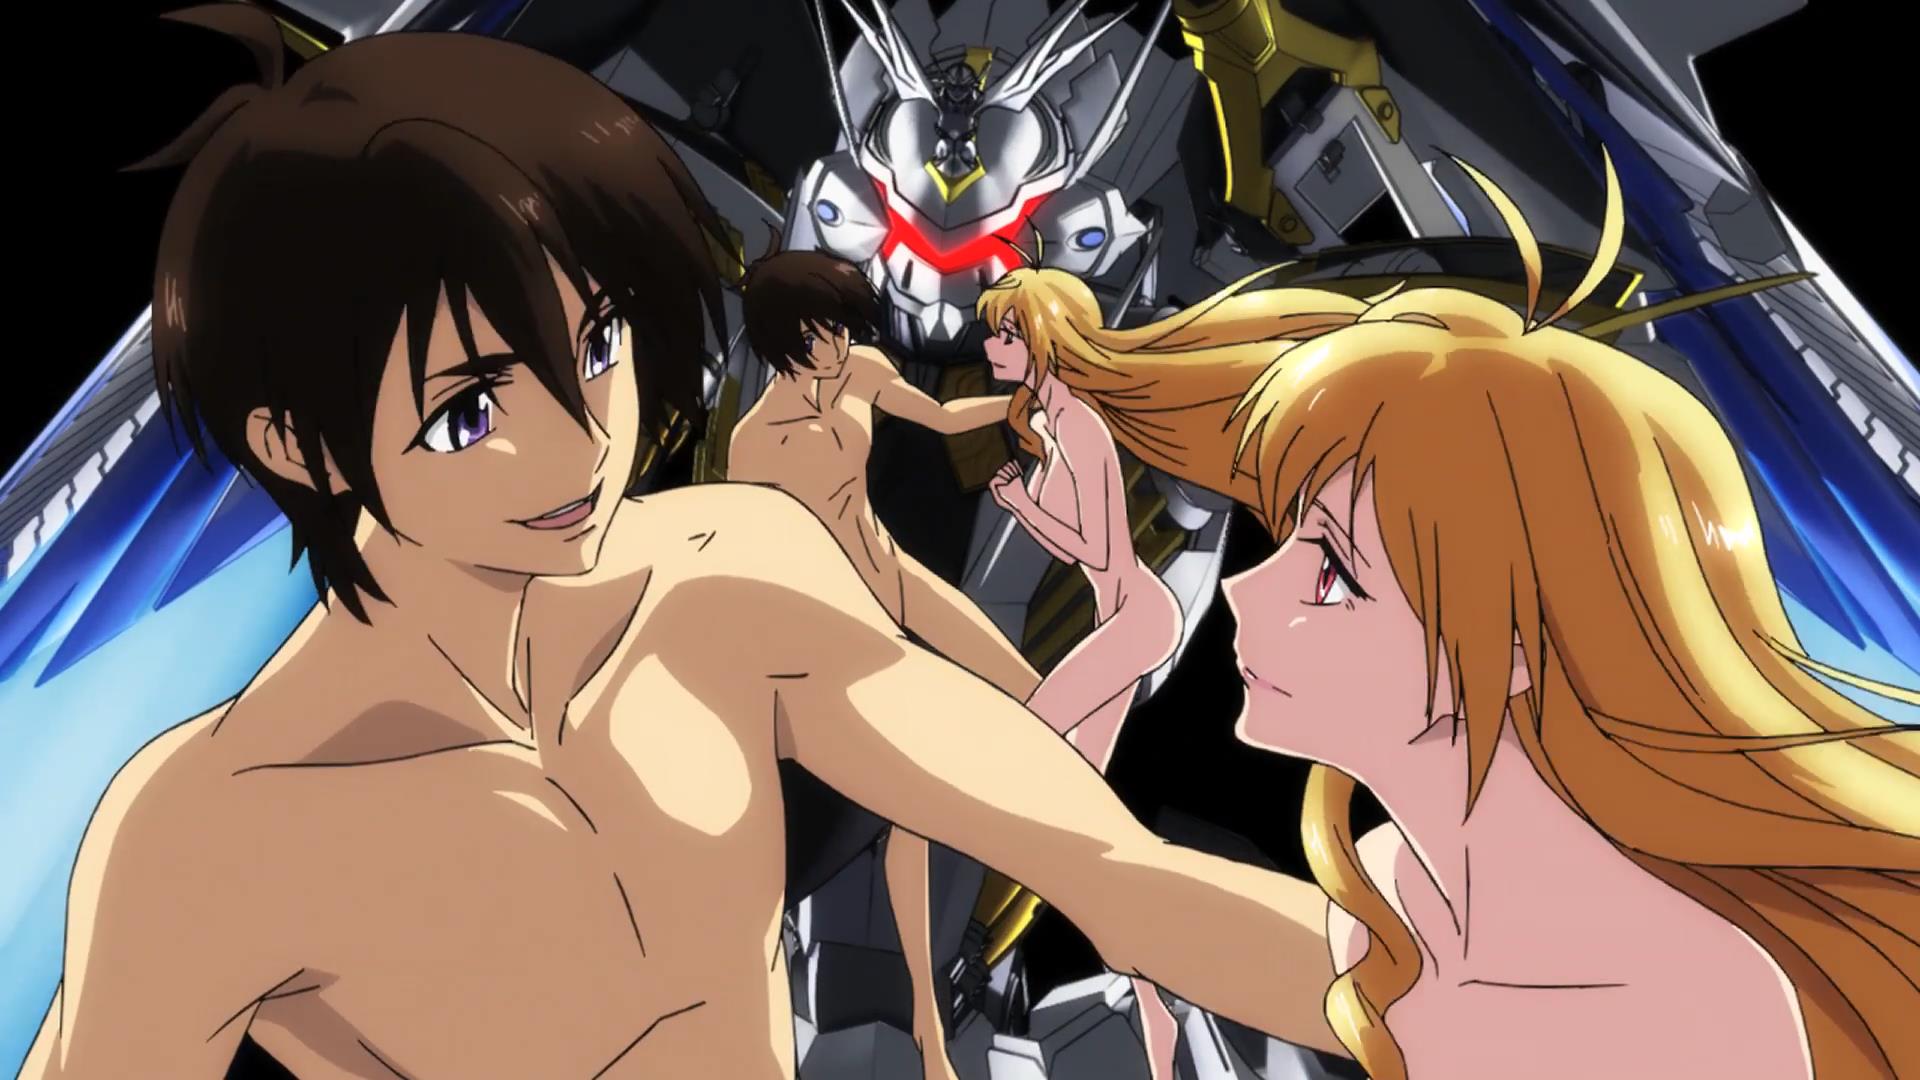 Cross Ange Anime Makes Its Explosive Home Video Debut